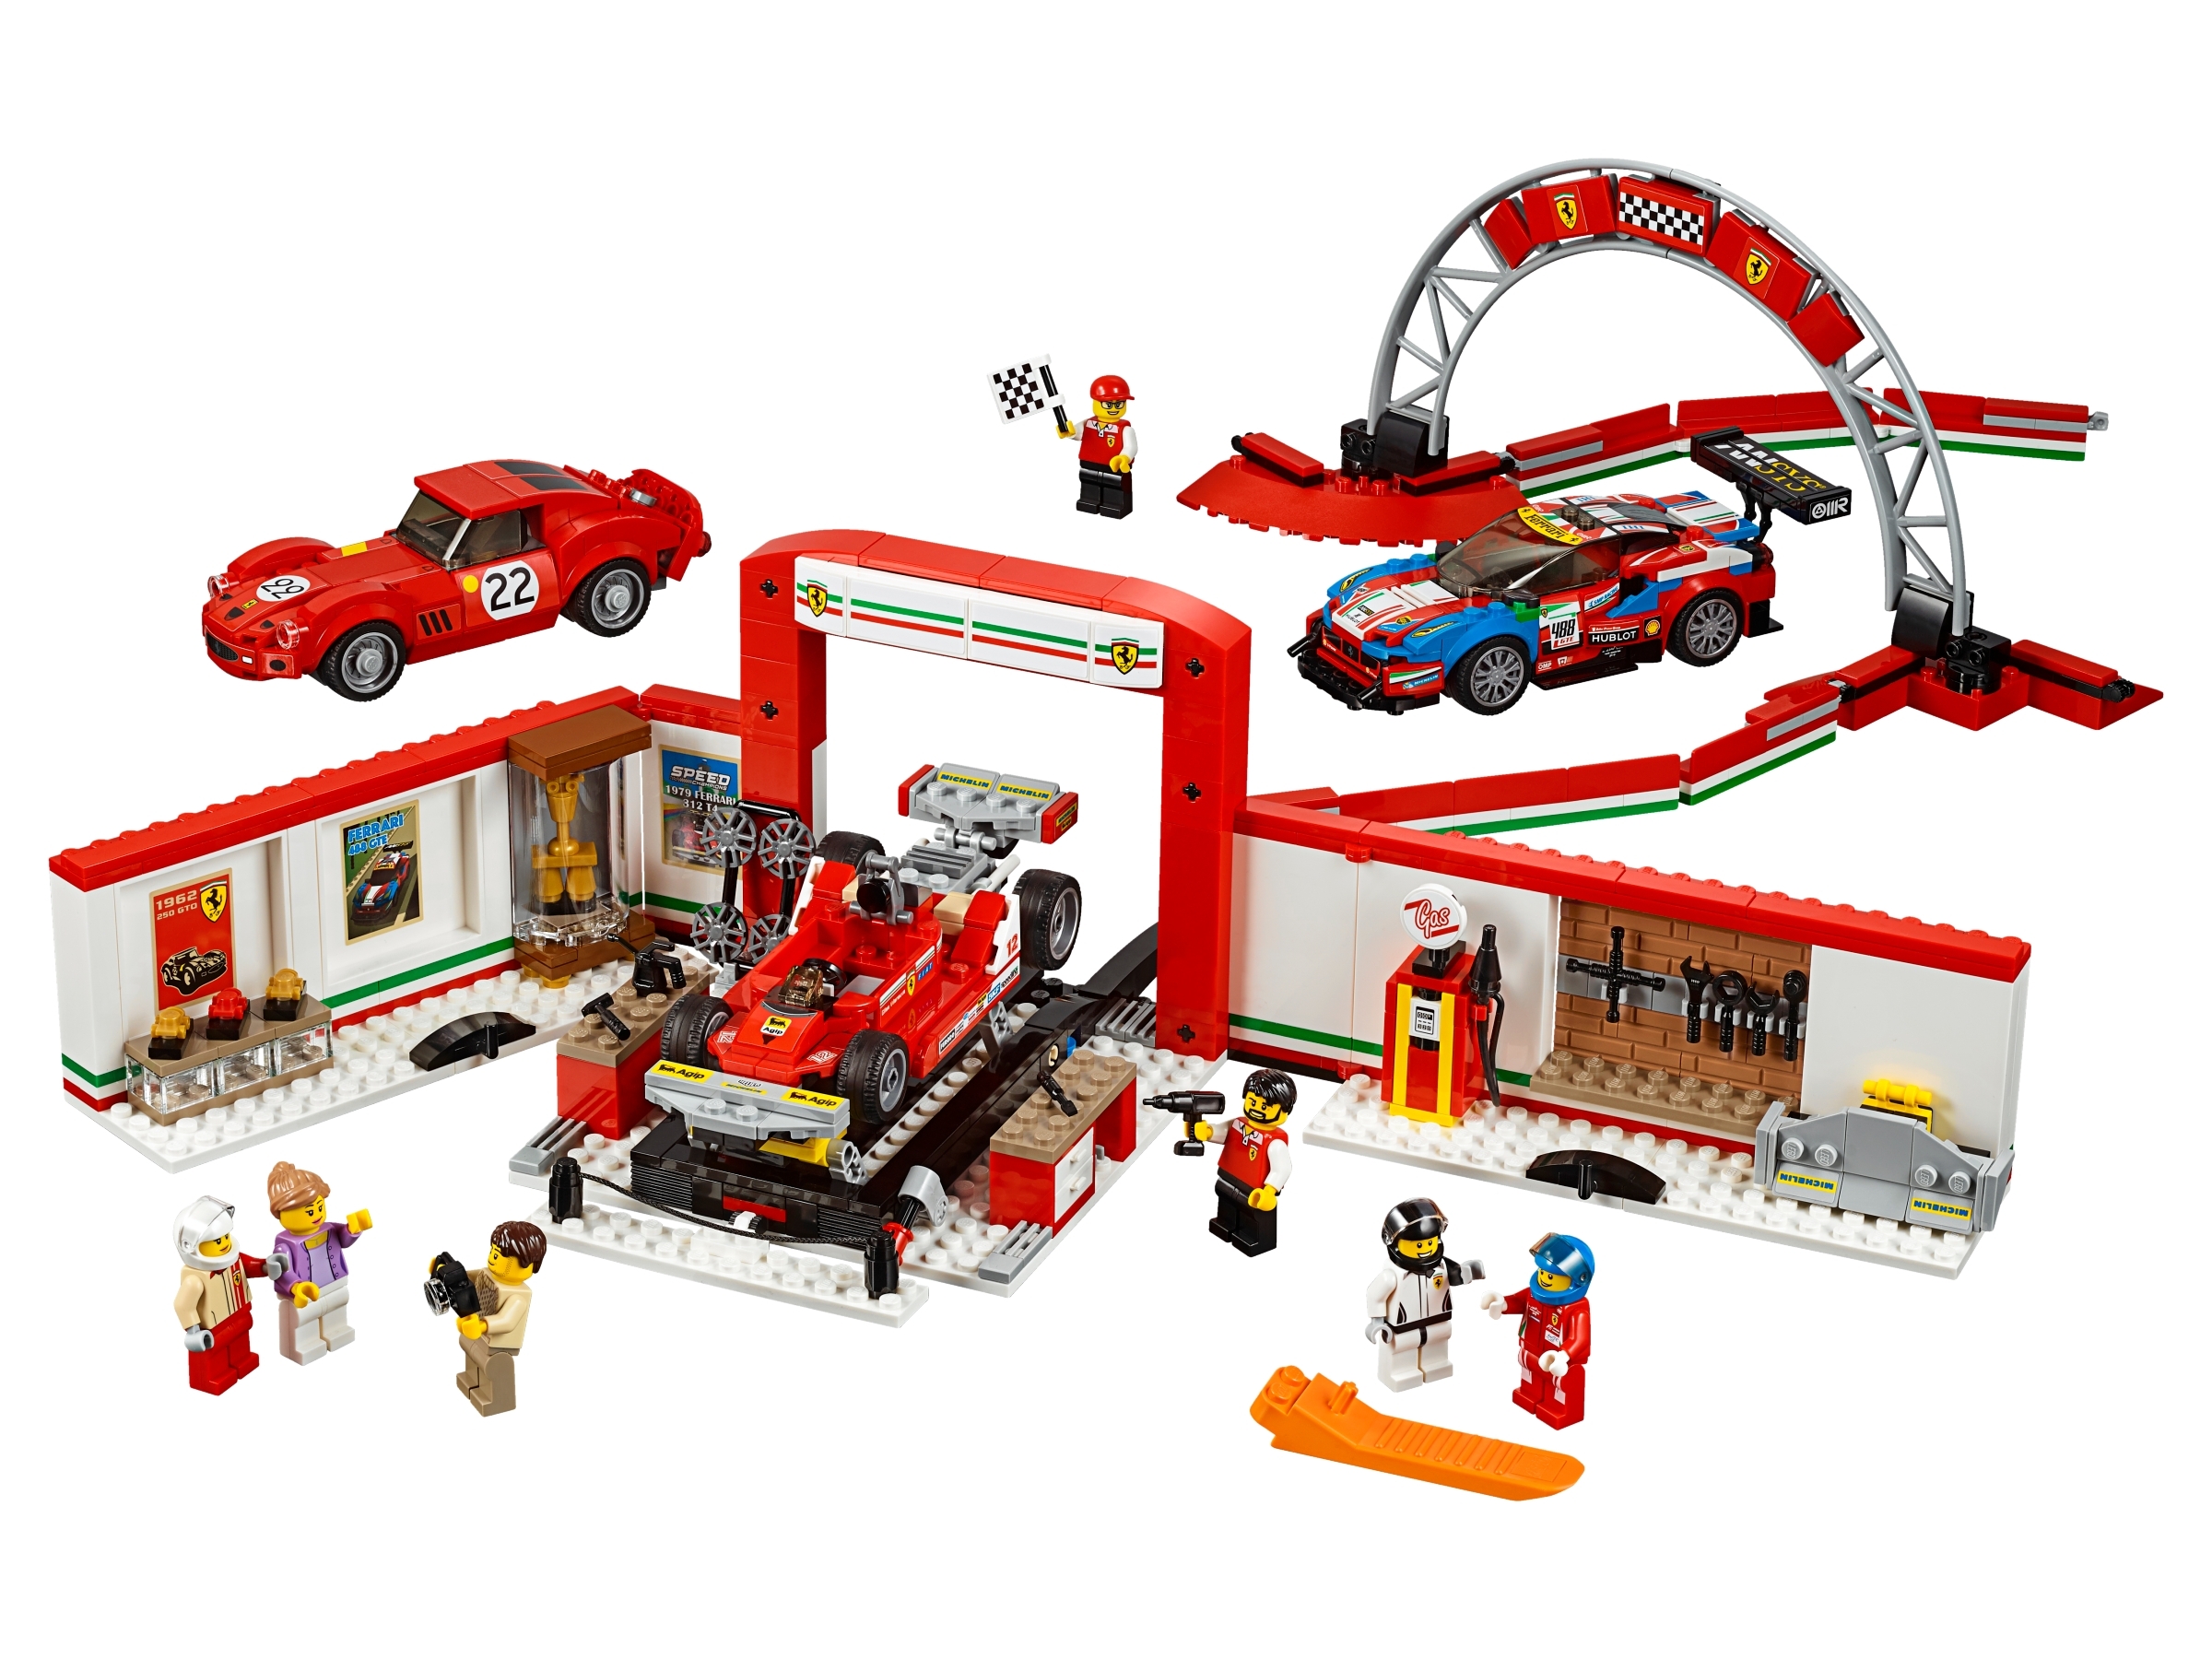 Ferrari Ultimate Garage 75889 | Speed Champions | online at the Official LEGO® Shop US